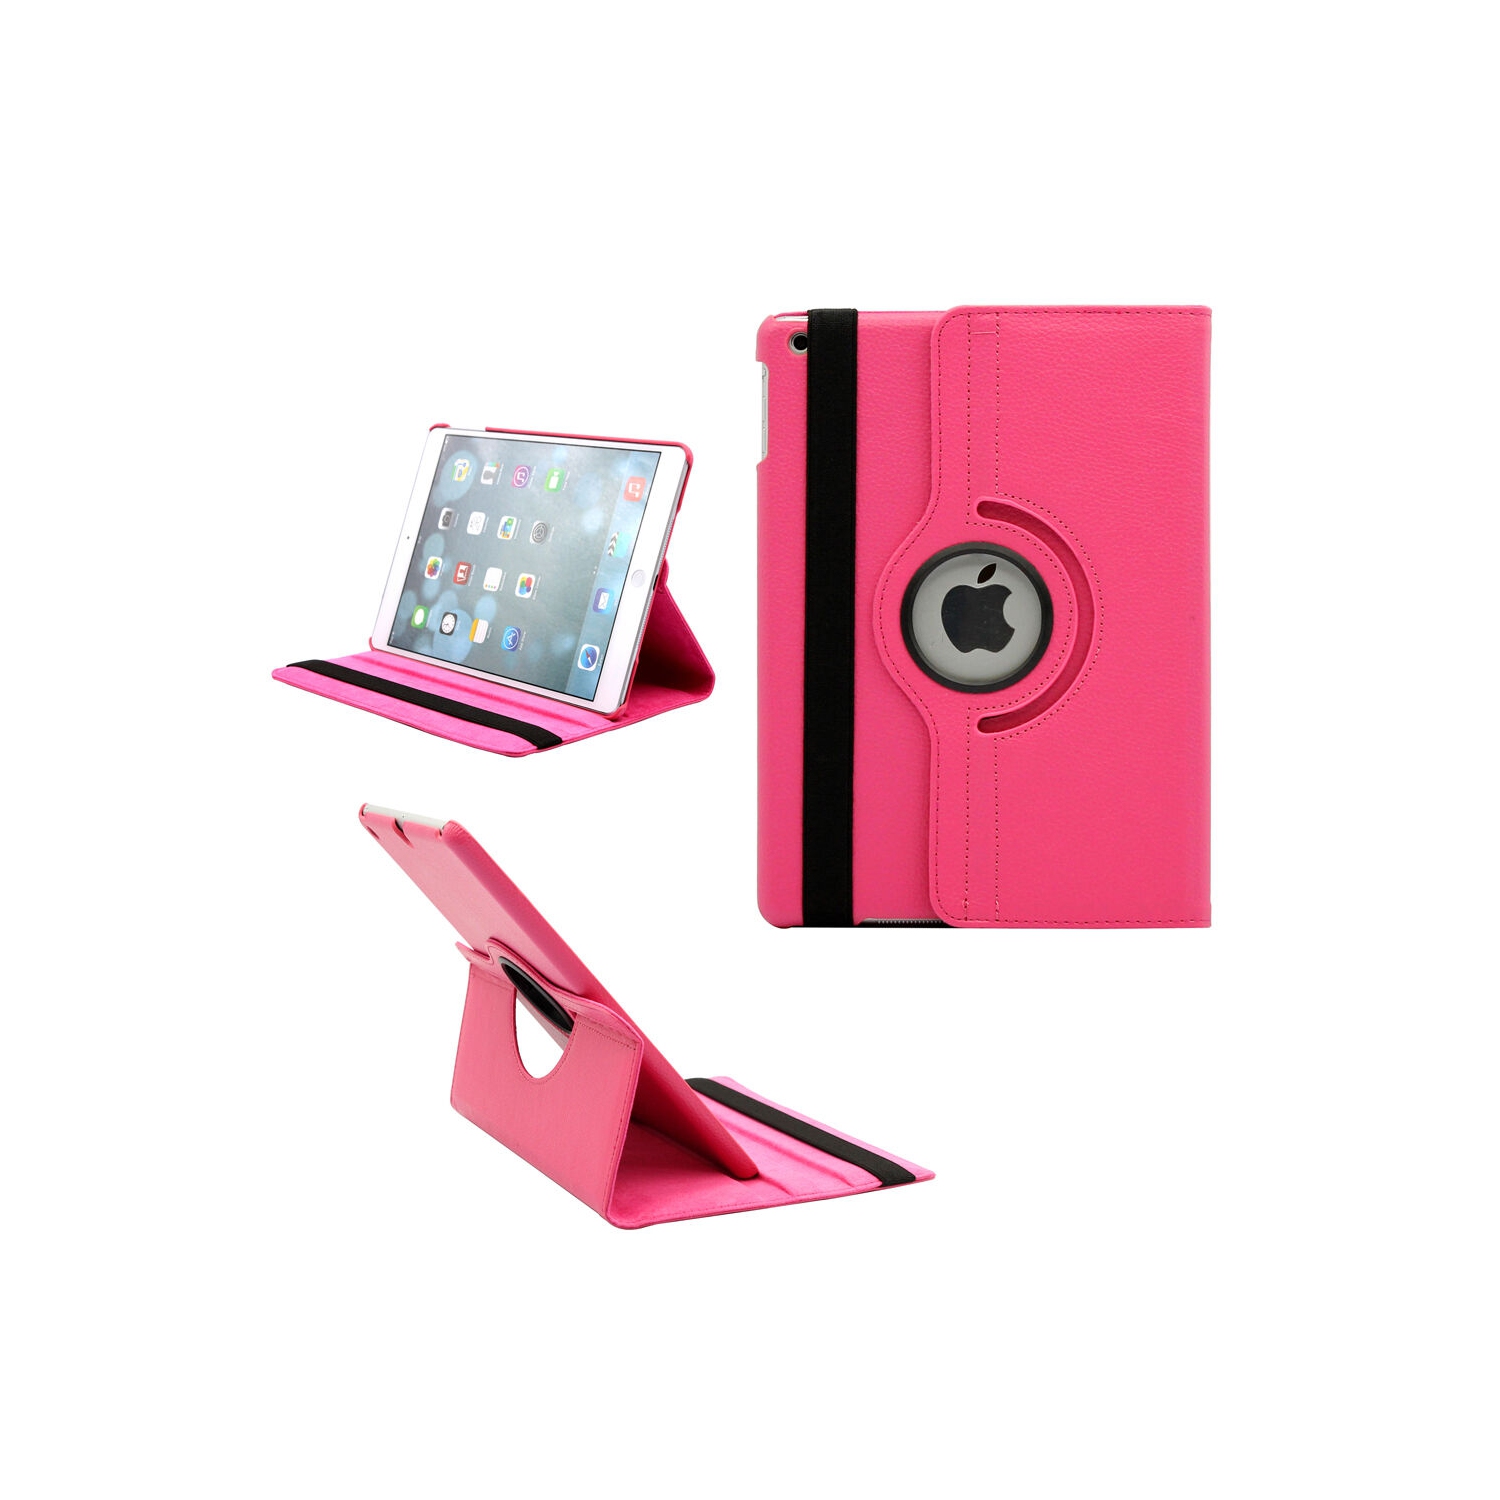 【CSmart】 360 Rotating PU Leather Stand Case Smart Cover for iPad Air 1 2 1st 2nd Gen, Hot Pink